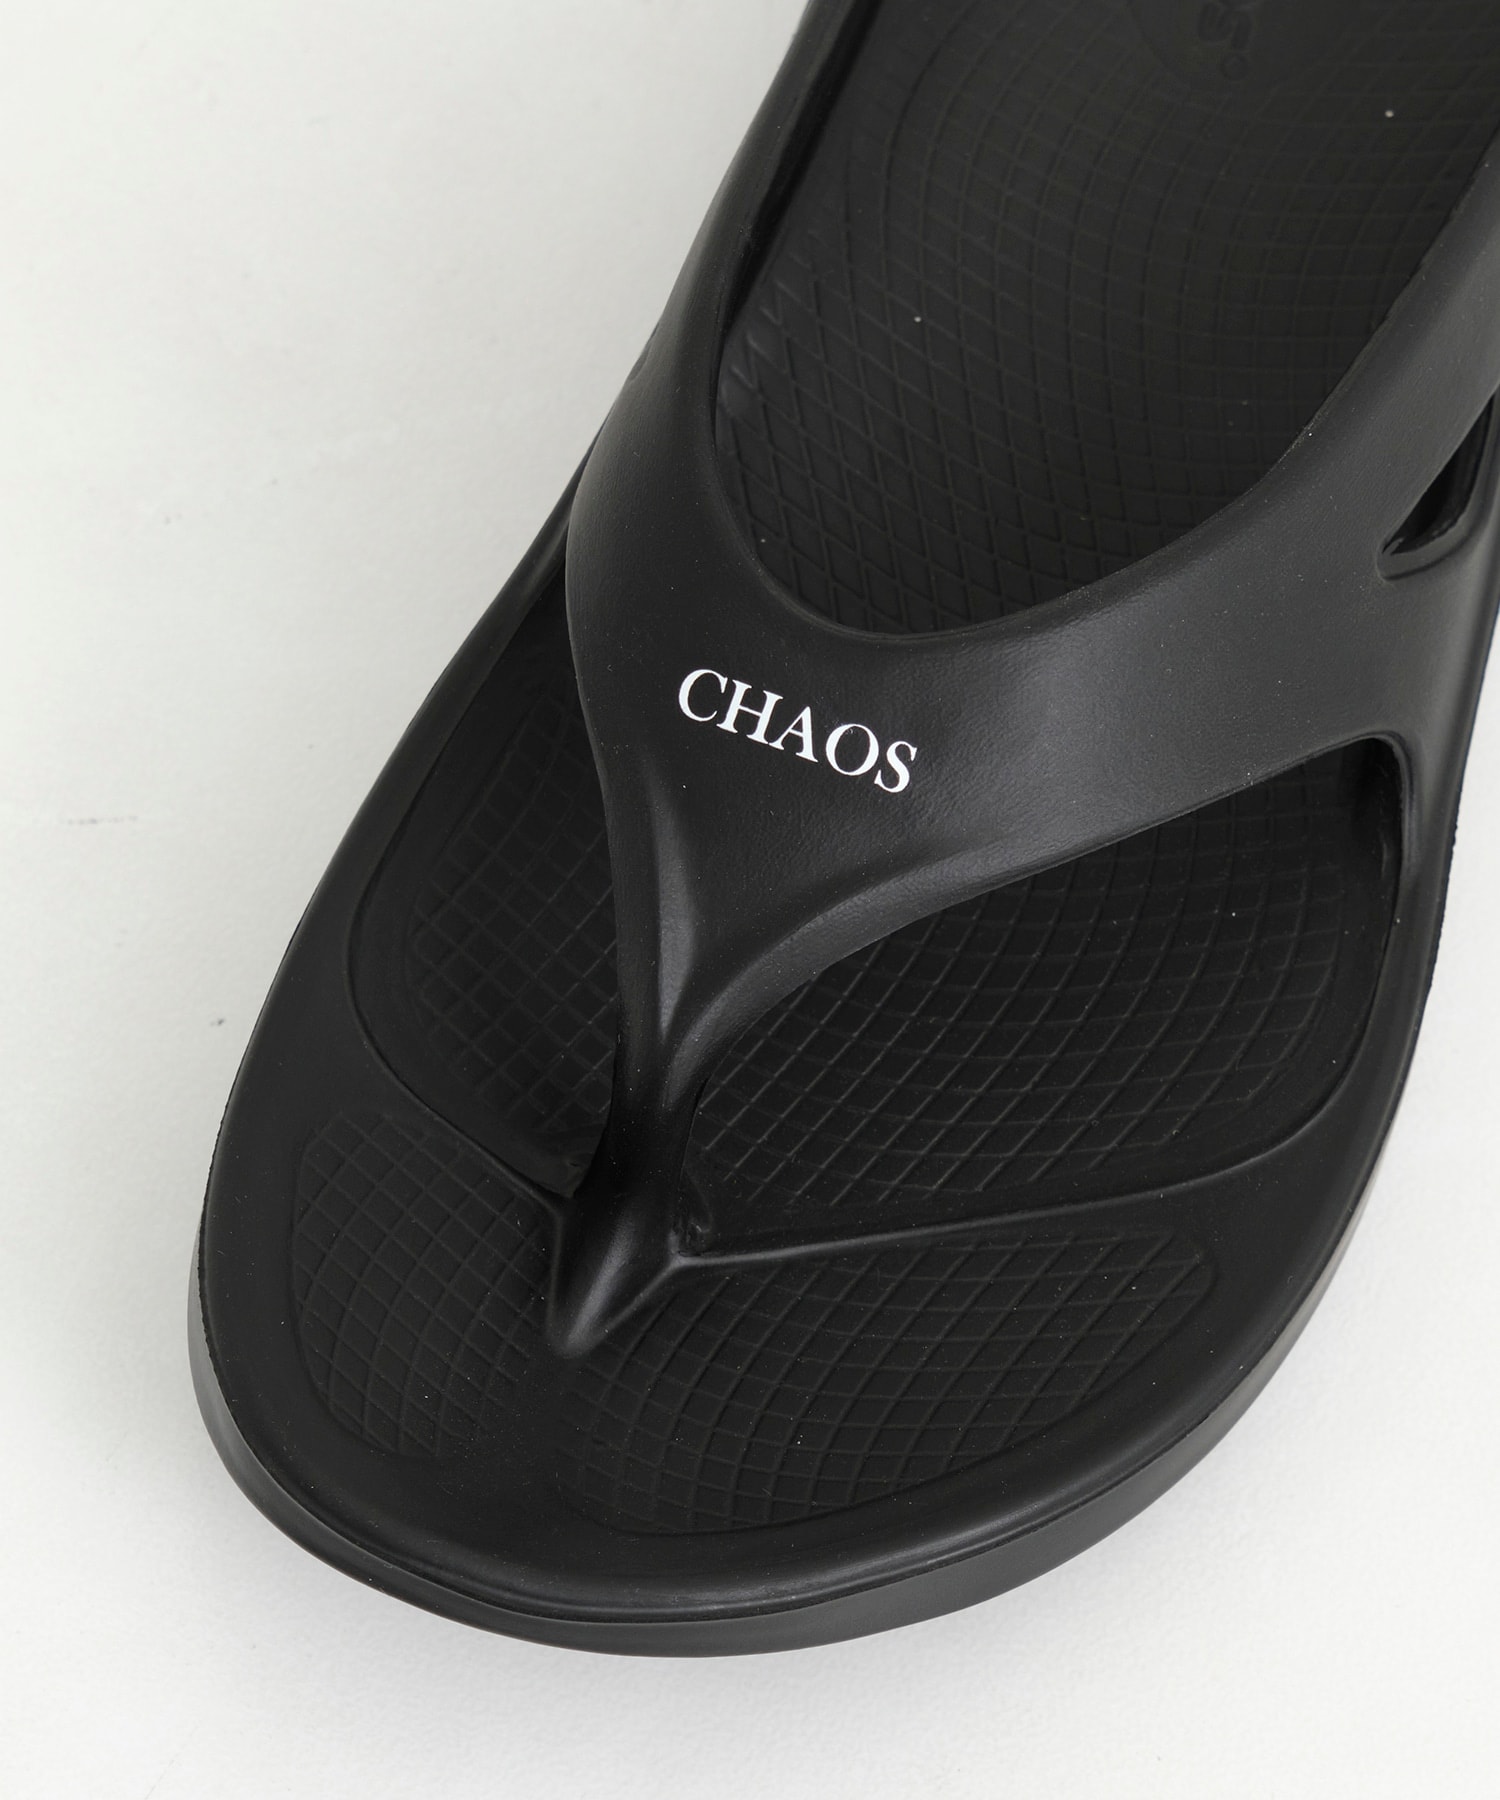 UC1D4F04 OOFOS SANDAL UNDERCOVER